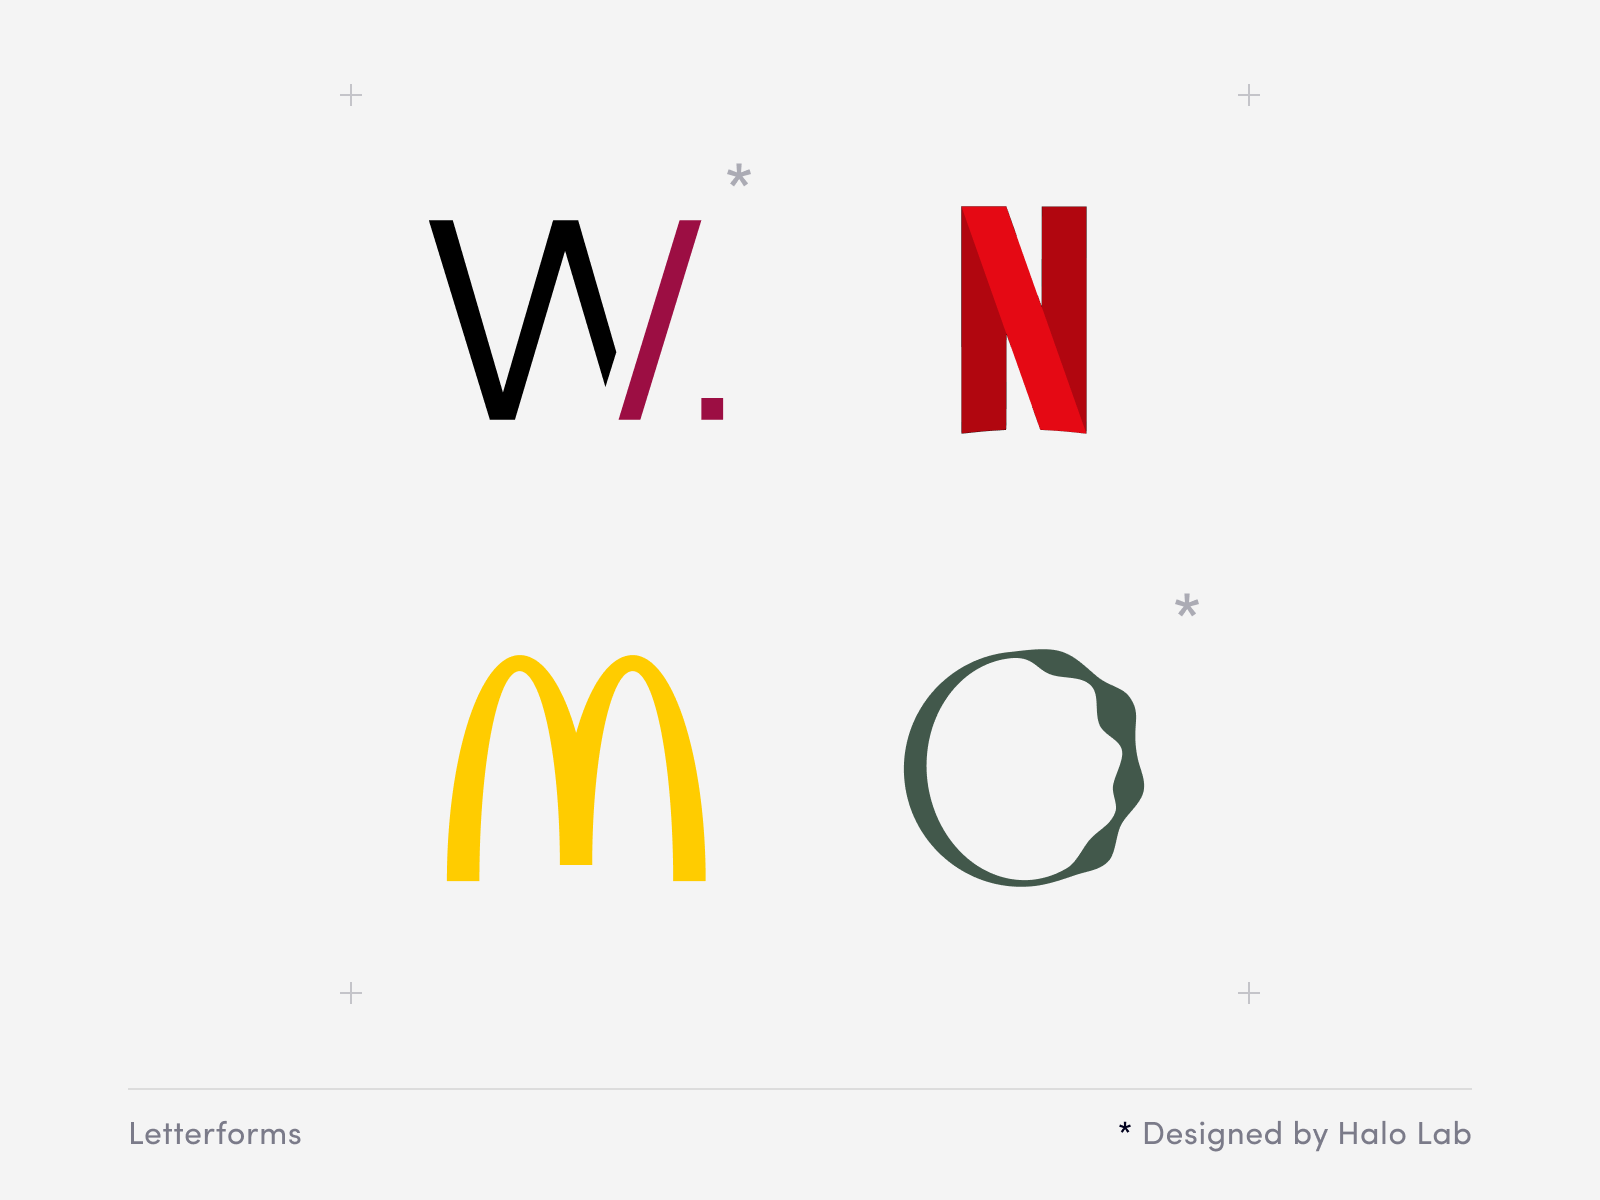 Letterforms look well both as app icons and on printed products